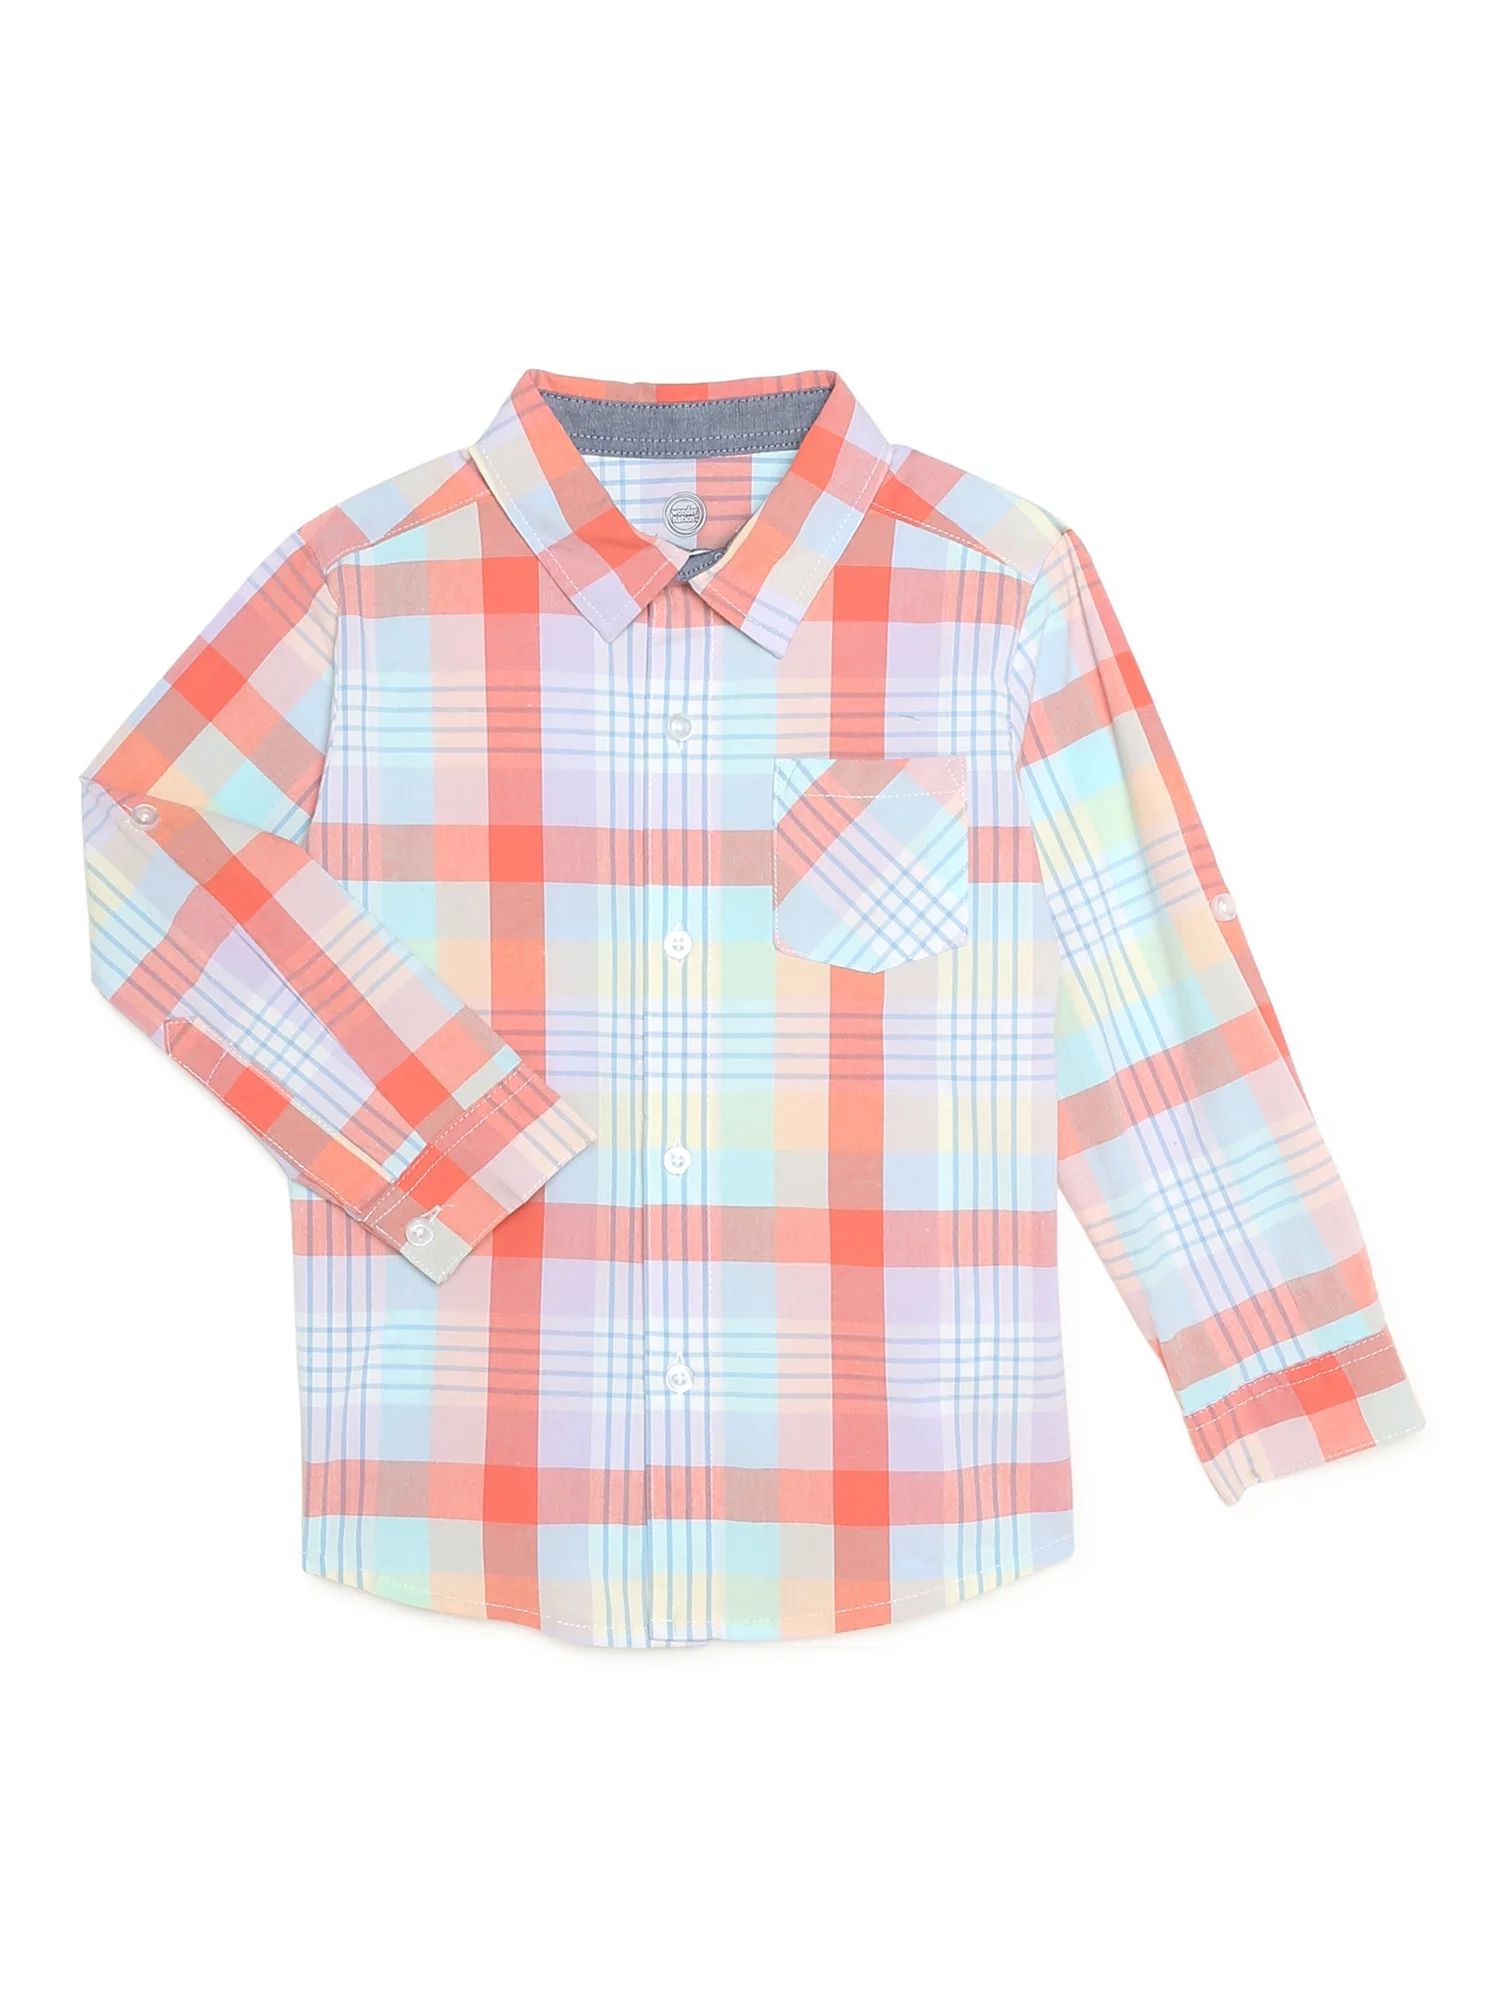 Wonder Nation Baby and Toddler Boys Long Sleeve Button-Up Shirt, Sizes 12M-5T | Walmart (US)